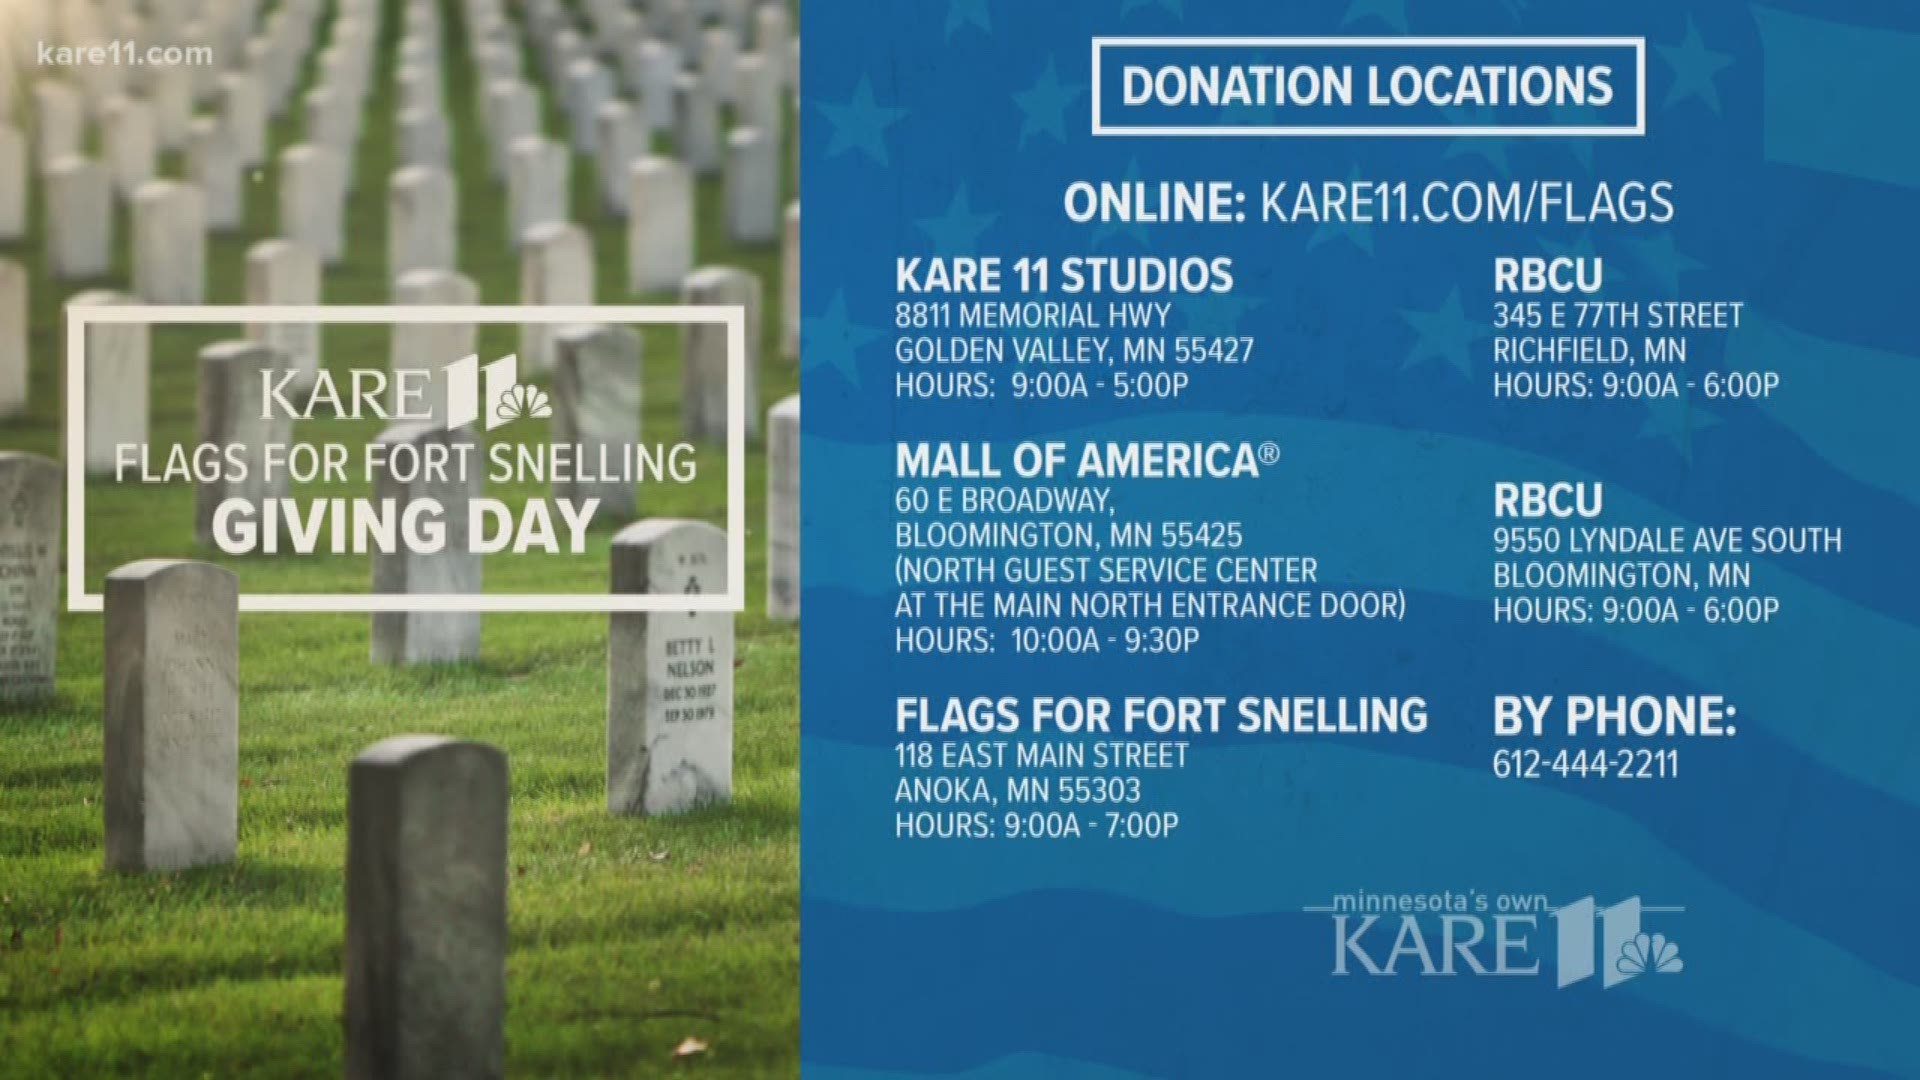 KARE 11's Giving Day to benefit Flags for Fort Snelling